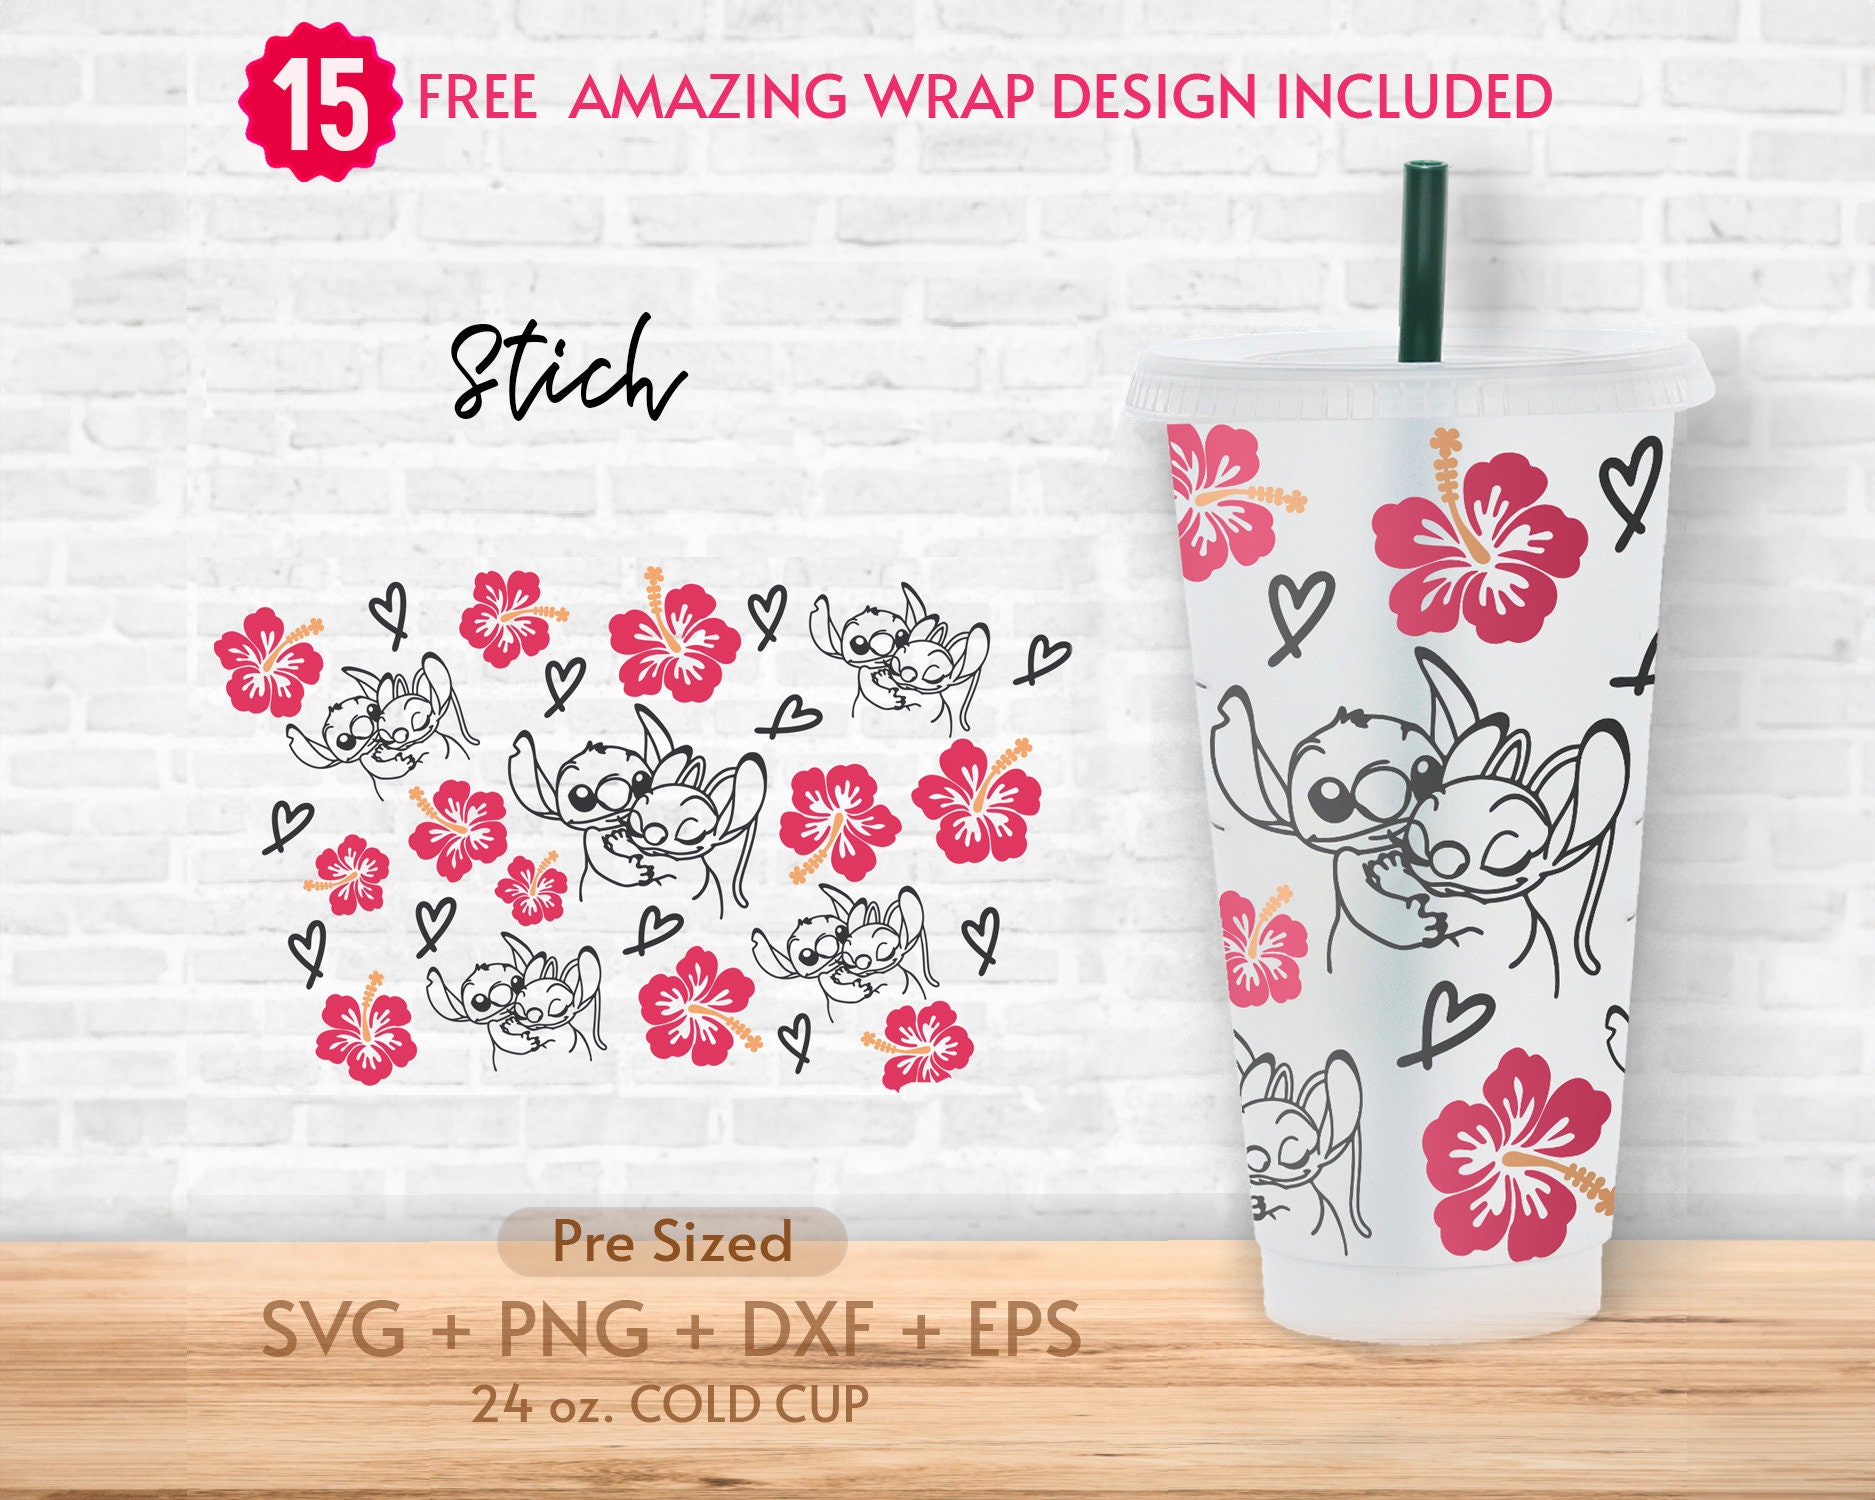 Stitch Starbucks cup - Onia's designer space's Ko-fi Shop - Ko-fi ❤️ Where  creators get support from fans through donations, memberships, shop sales  and more! The original 'Buy Me a Coffee' Page.